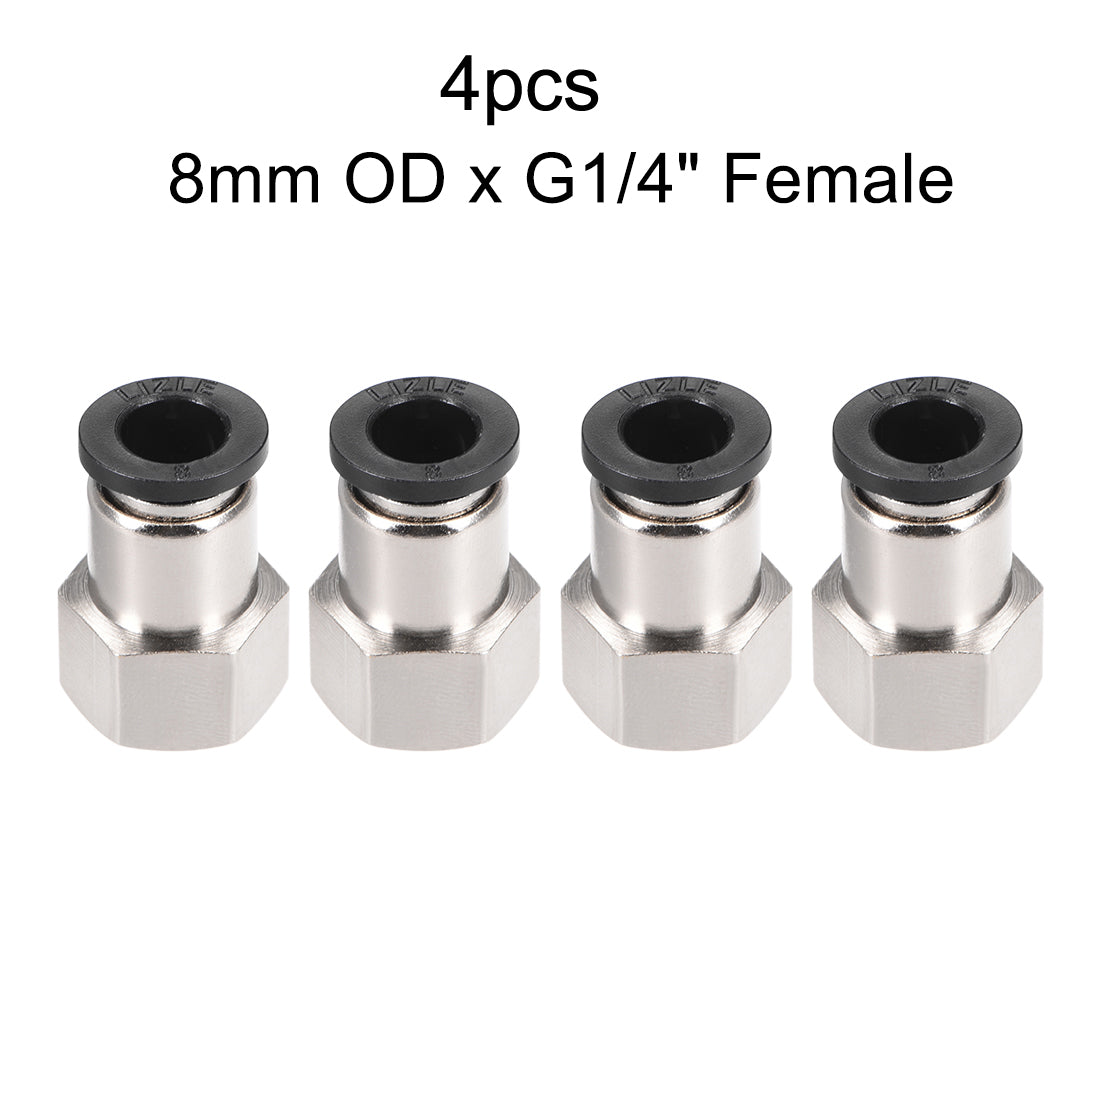 uxcell Uxcell Push to Connect Tube Fitting Adapter 8mm OD x G1/4" Female Silver Tone 4pcs